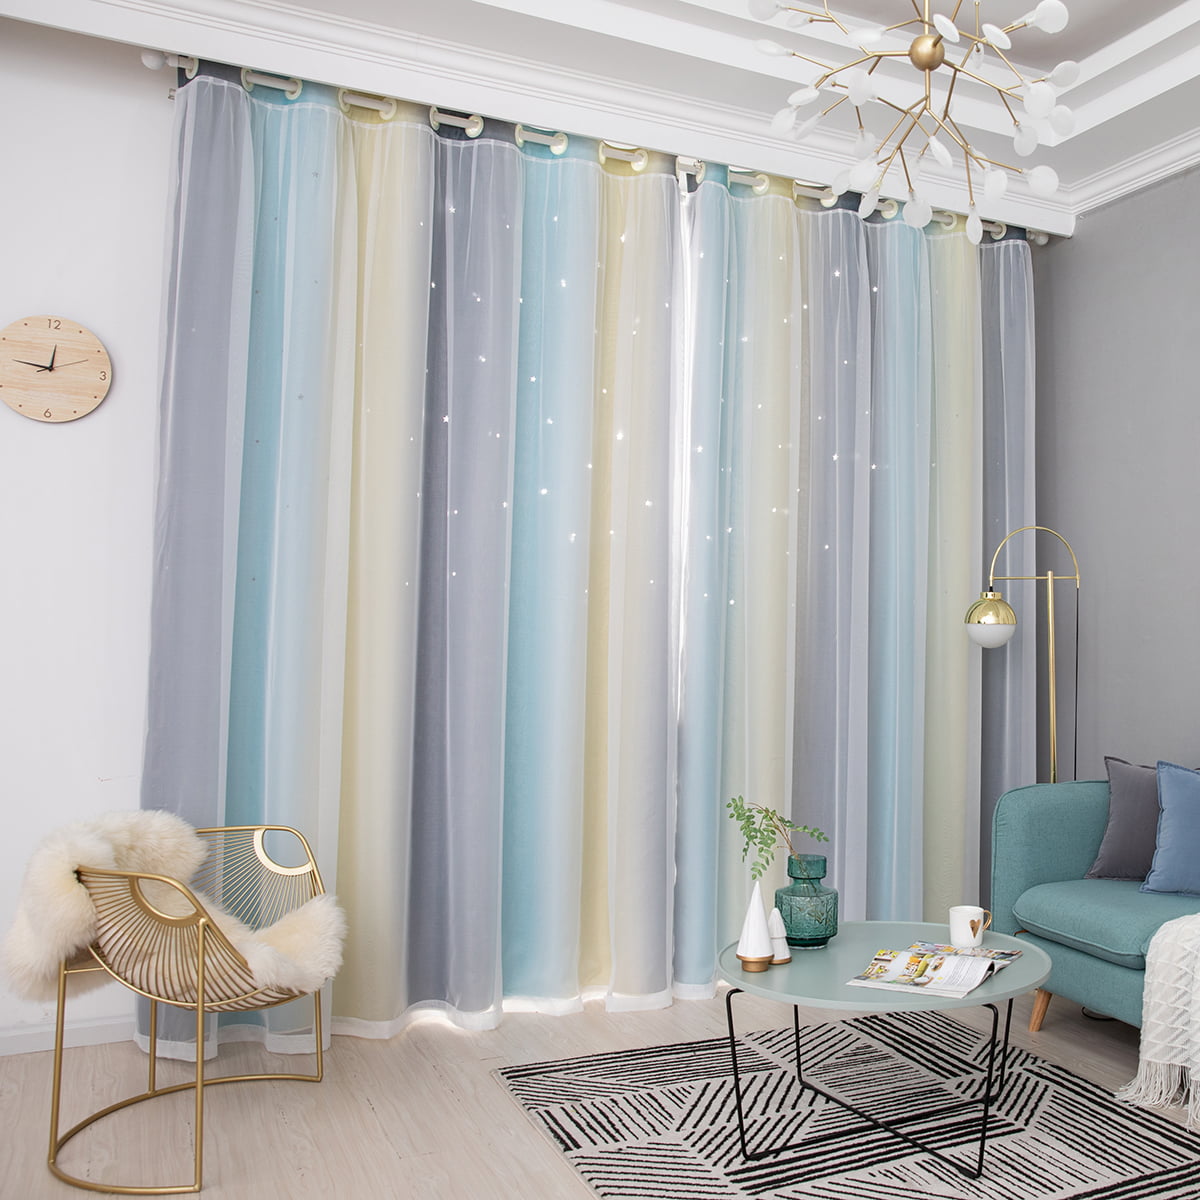 Gradient Hollow Star Curtain Bedroom Full Blackout Window Drapes Home Room Decor 